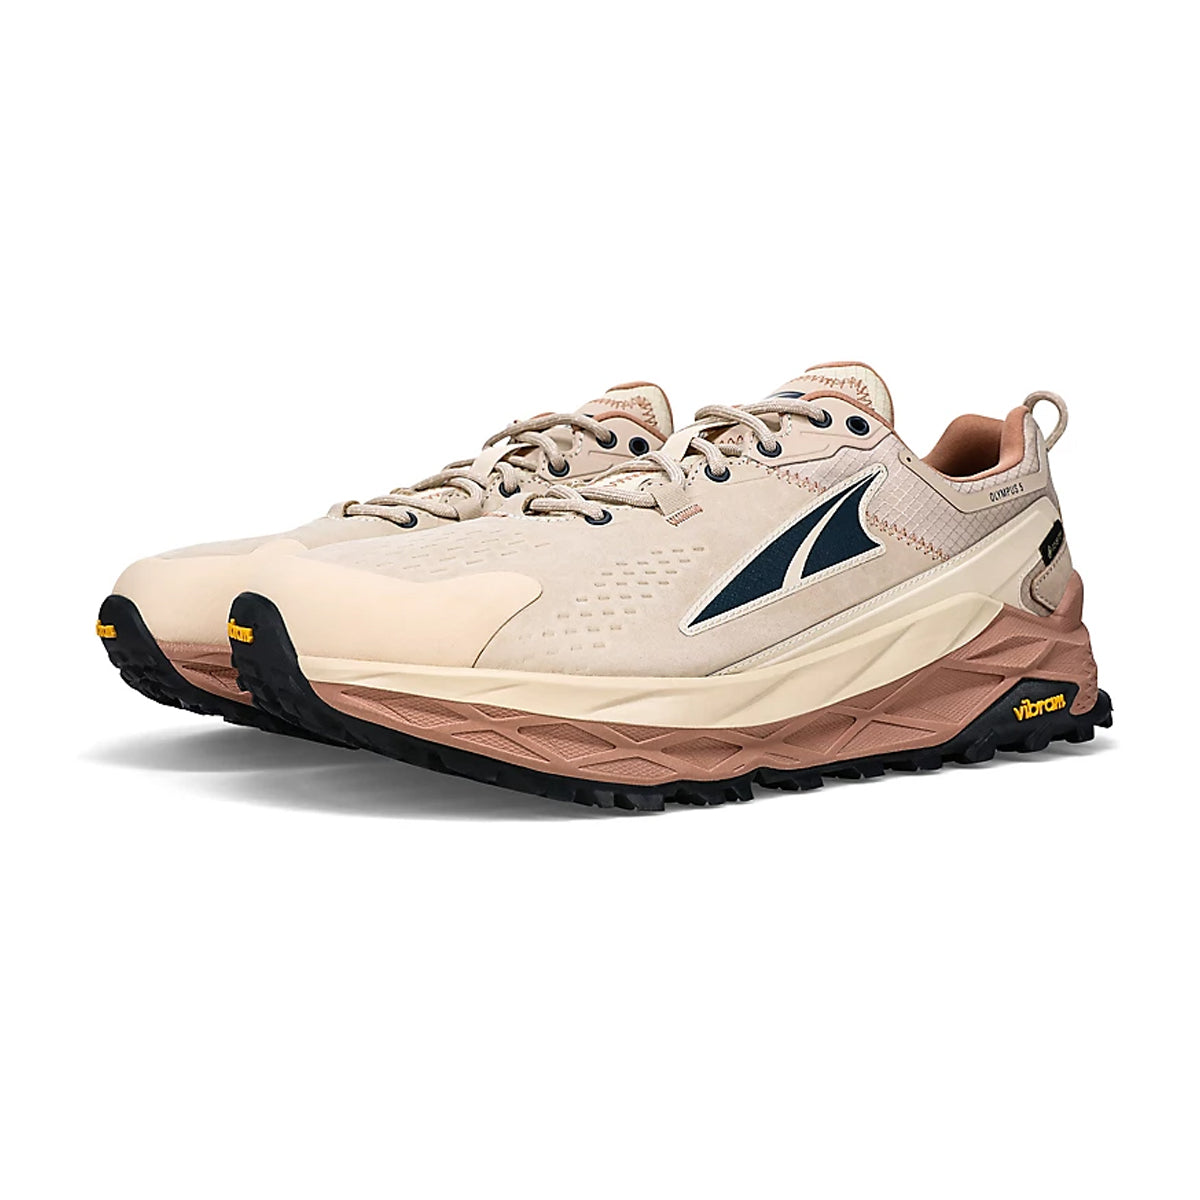 Shop for Altra Olympus 5 Hike Low GTX | GOHUNT